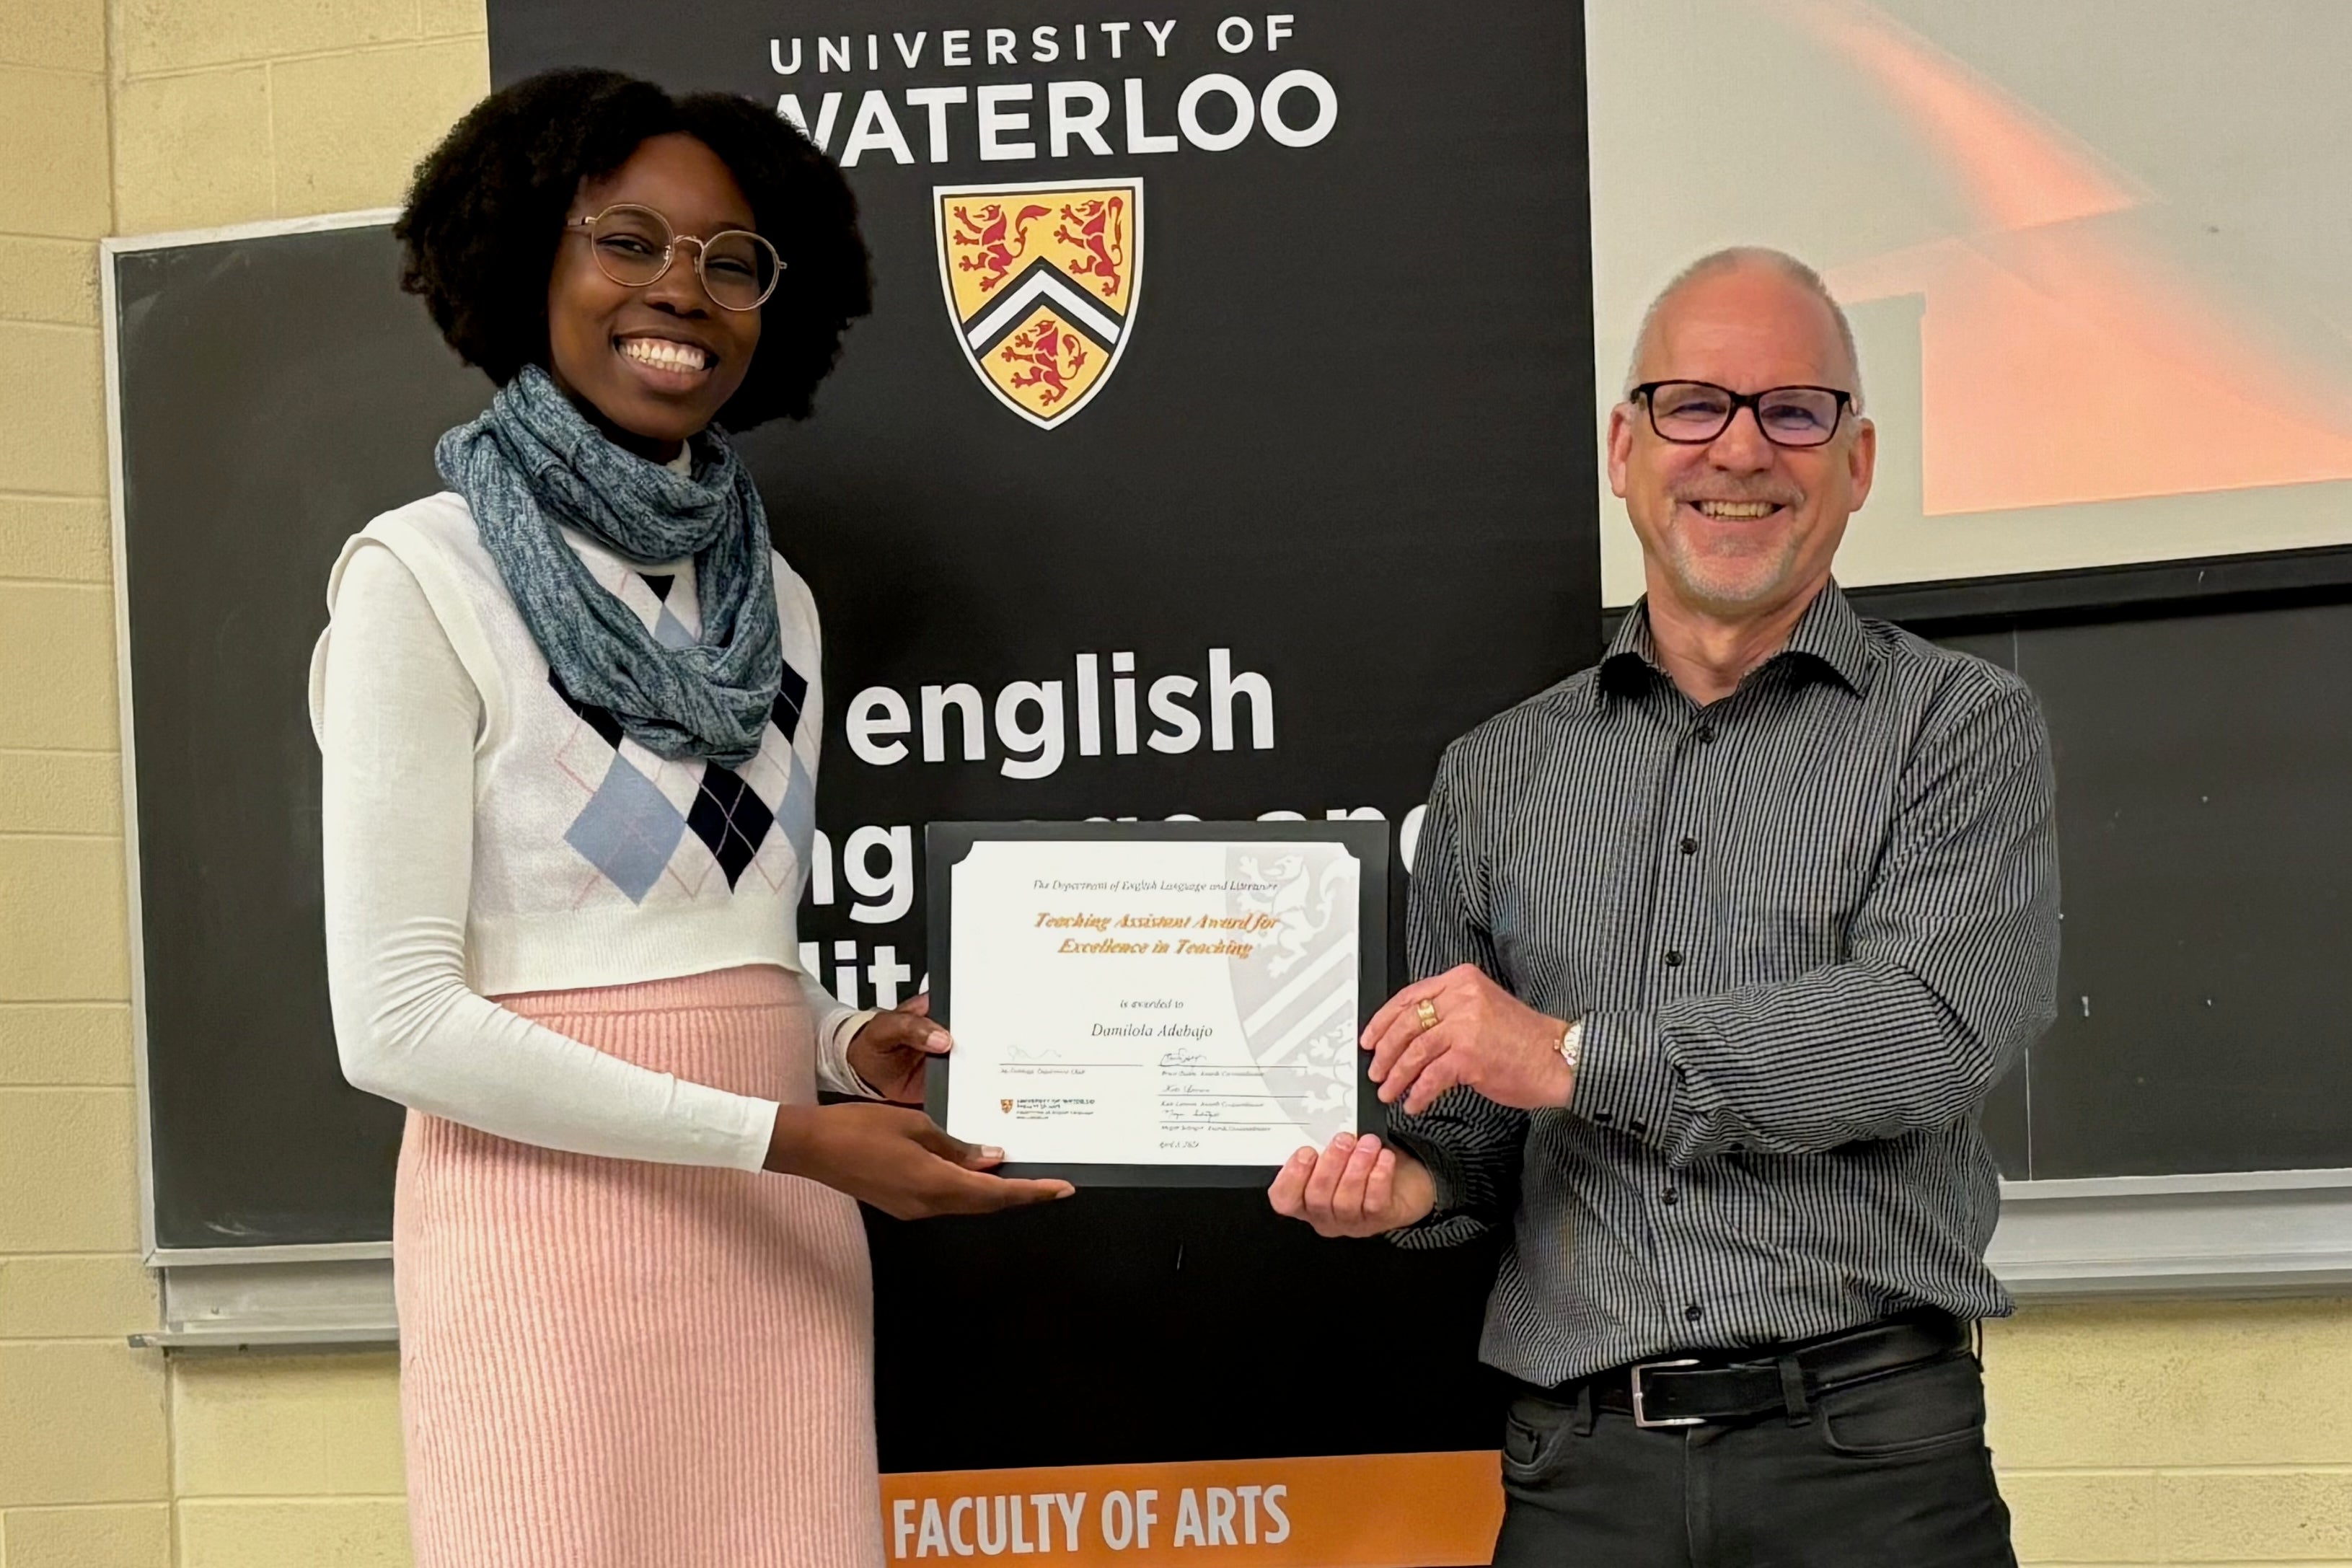 Damilola Adebajo receives the TA Award for Excellence in Teaching from Dr. Bruce Dadey.